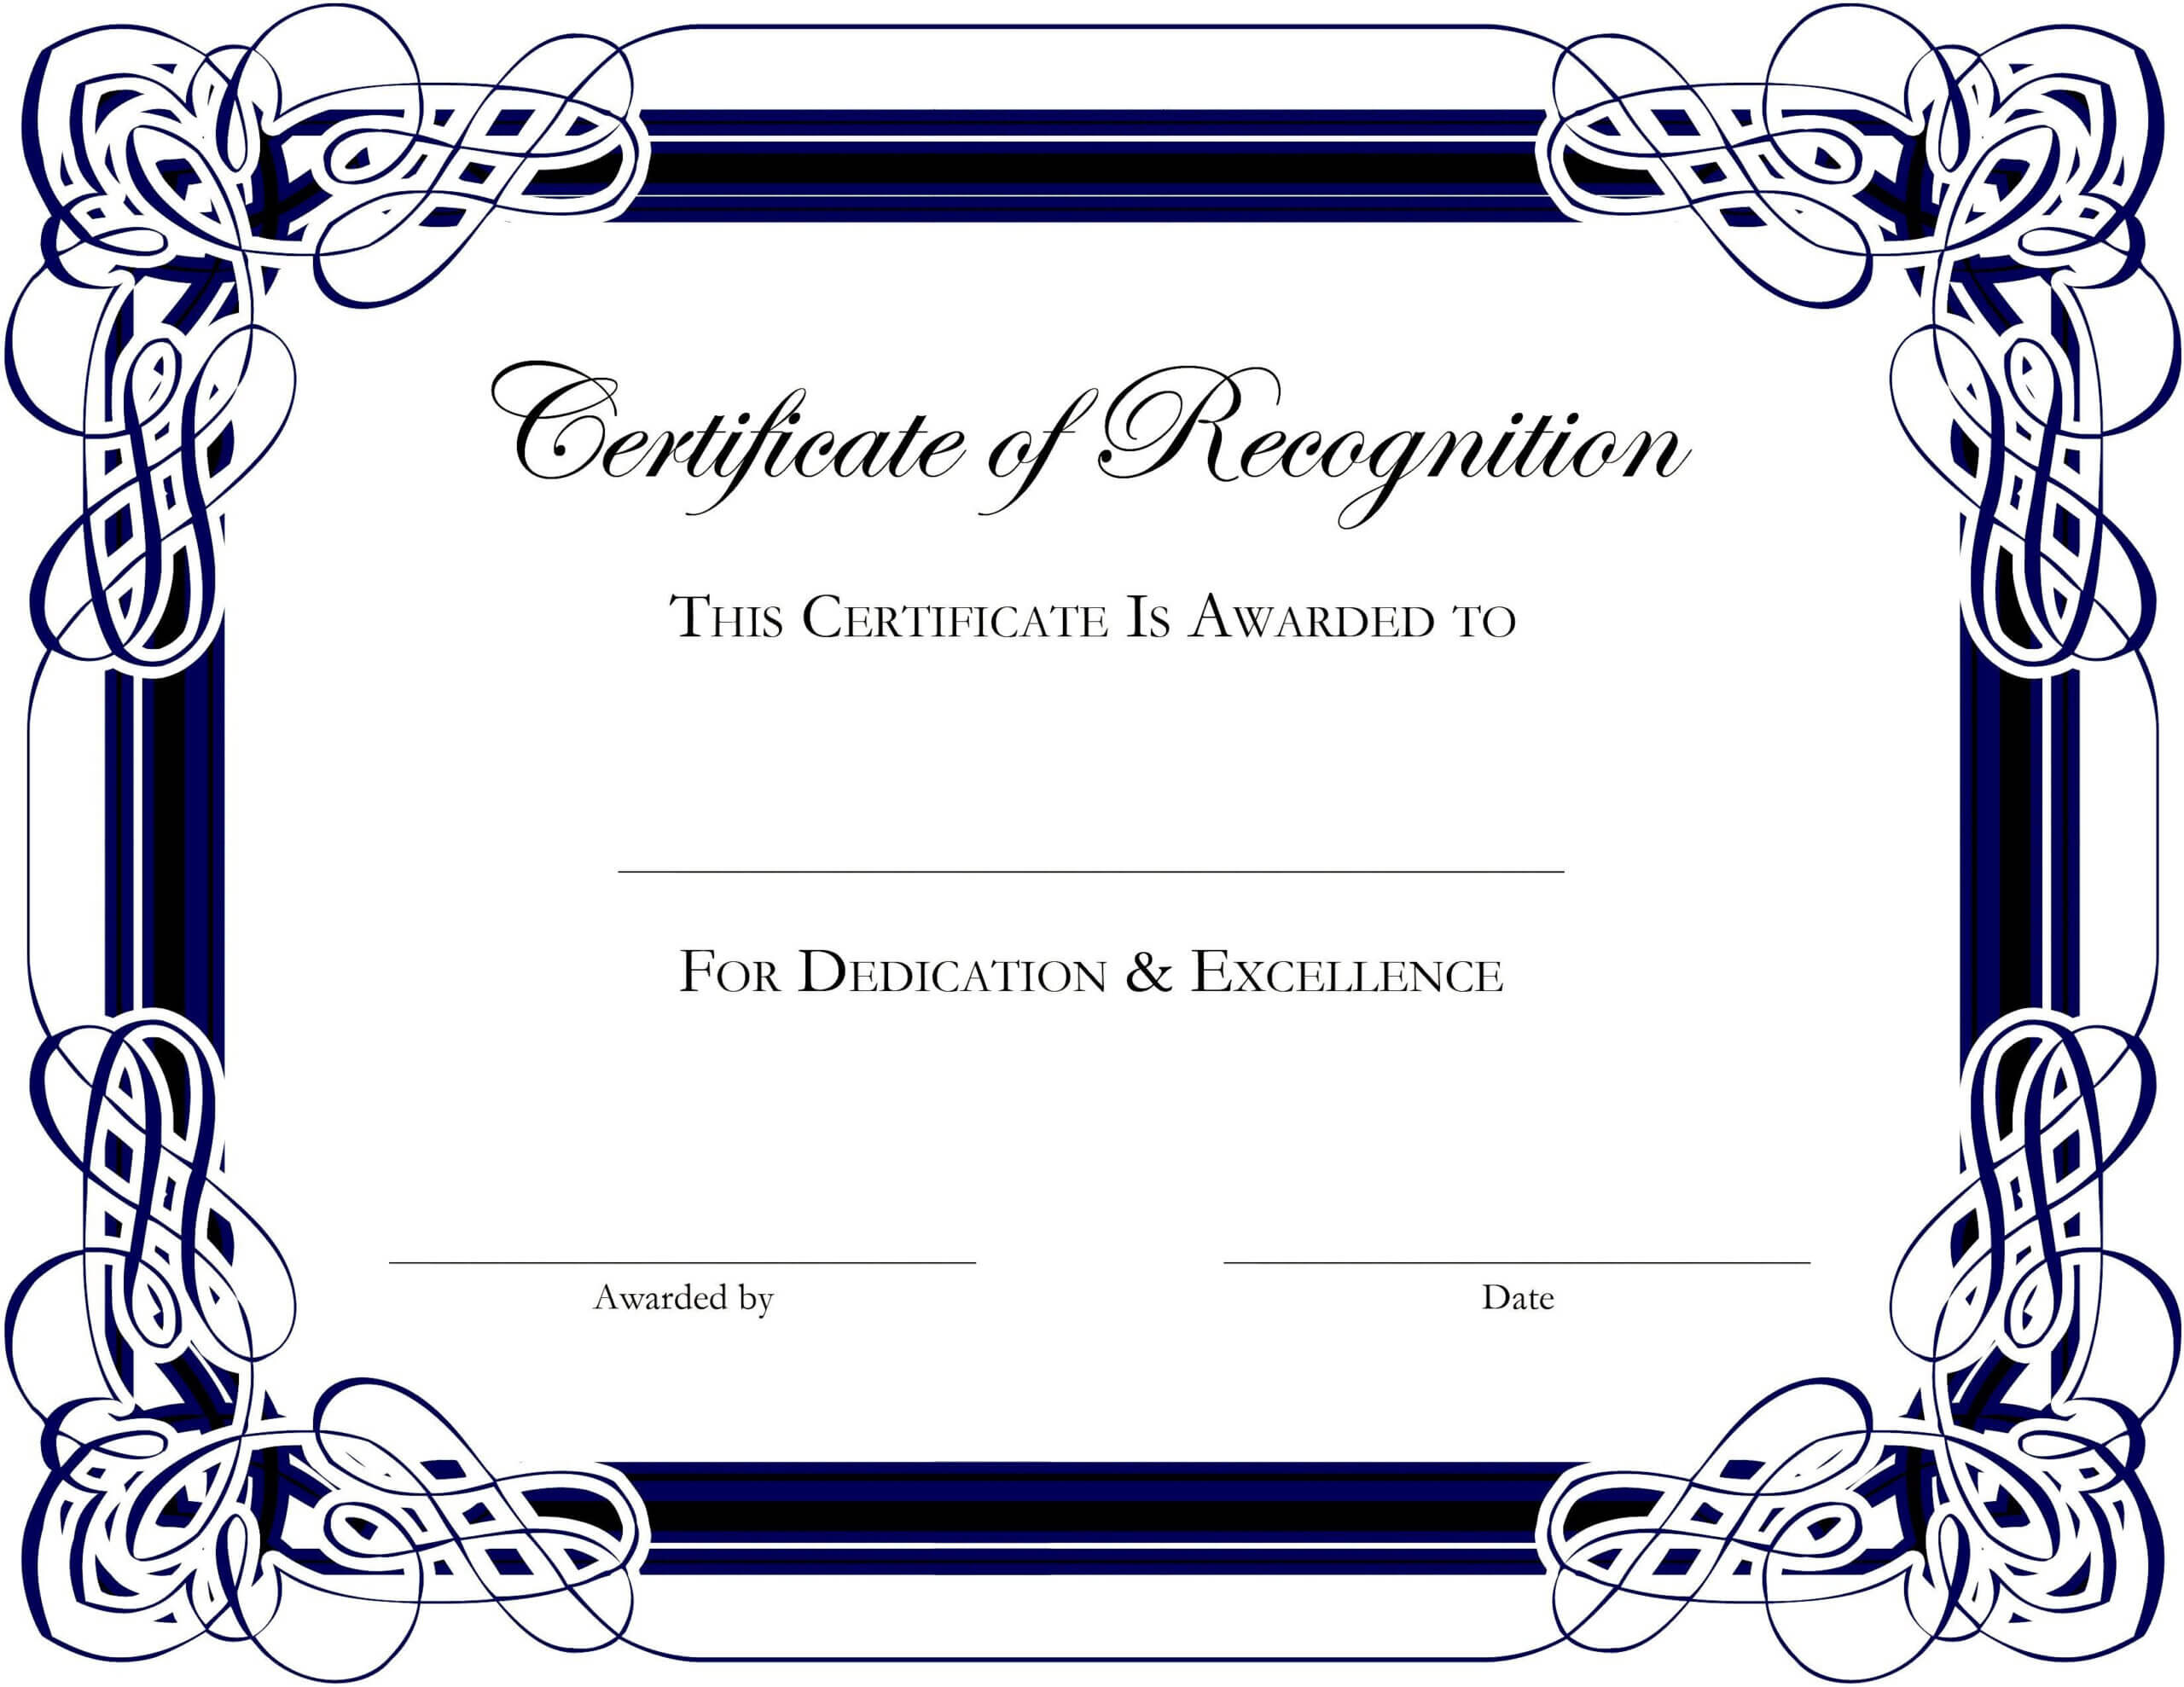 Award Templates For Microsoft Publisher | Besttemplate123 Throughout Certificate Of Excellence Template Word